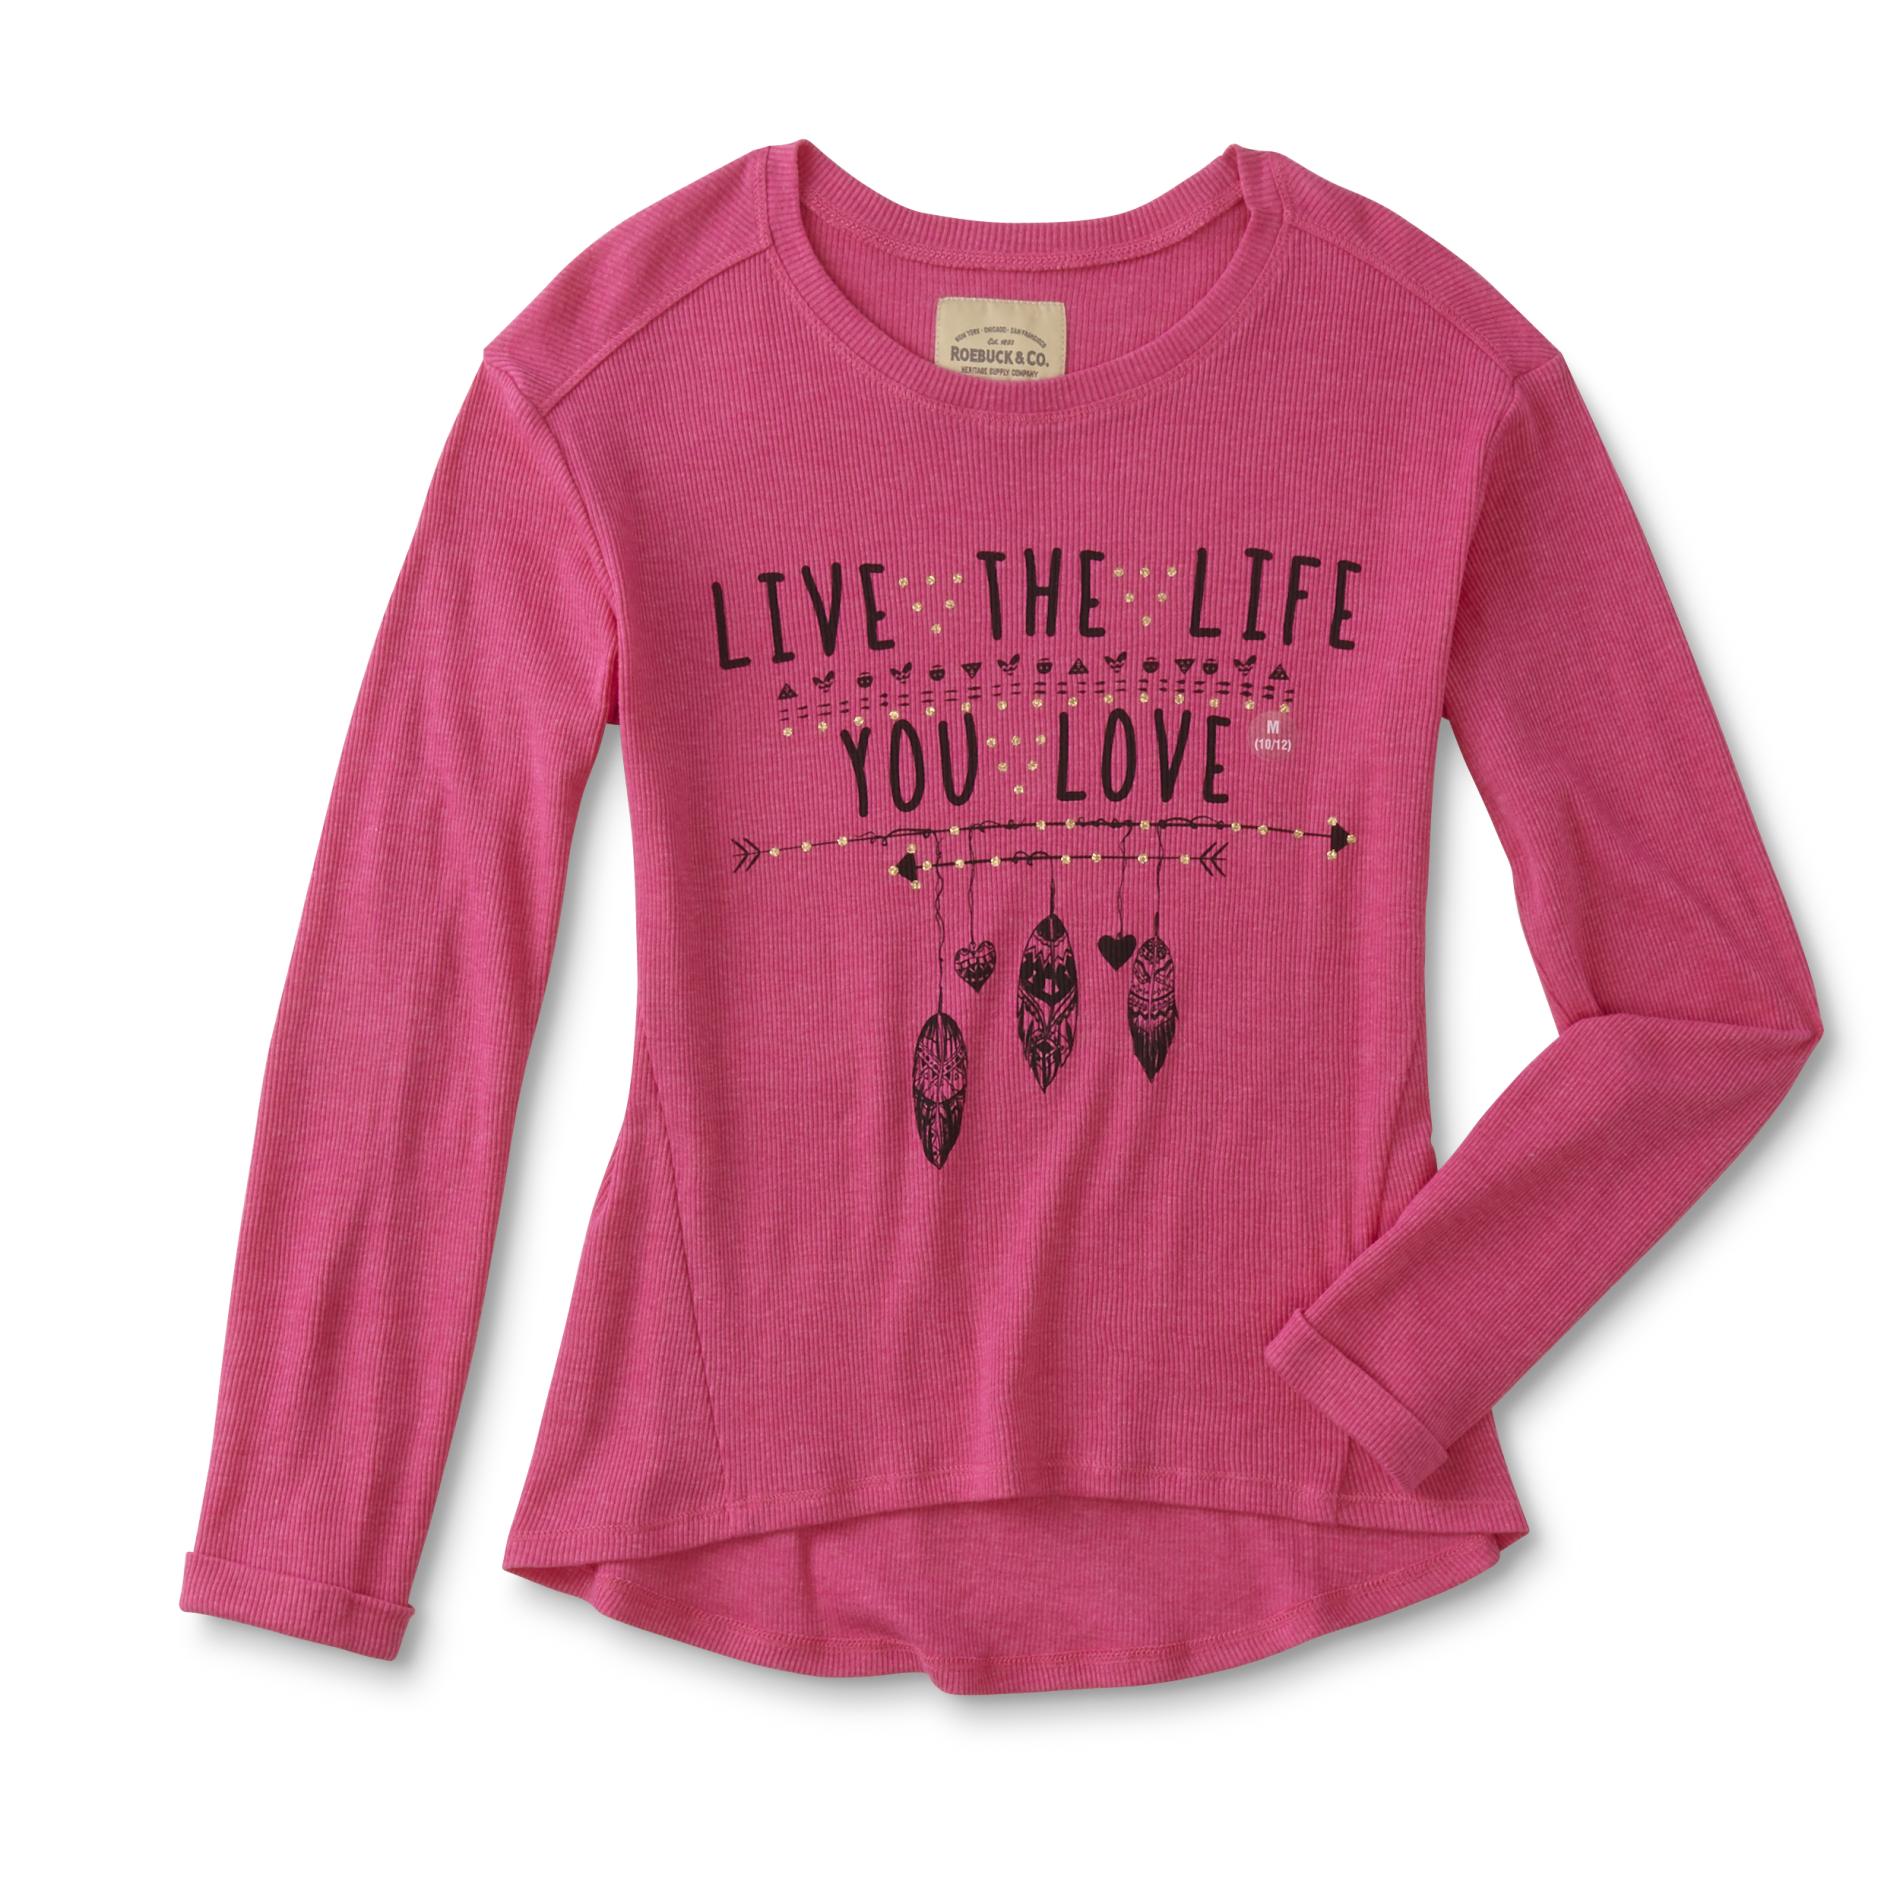 ROEBUCK & CO R1893 Girls' Long-Sleeve Graphic Top - Live The Life You Love